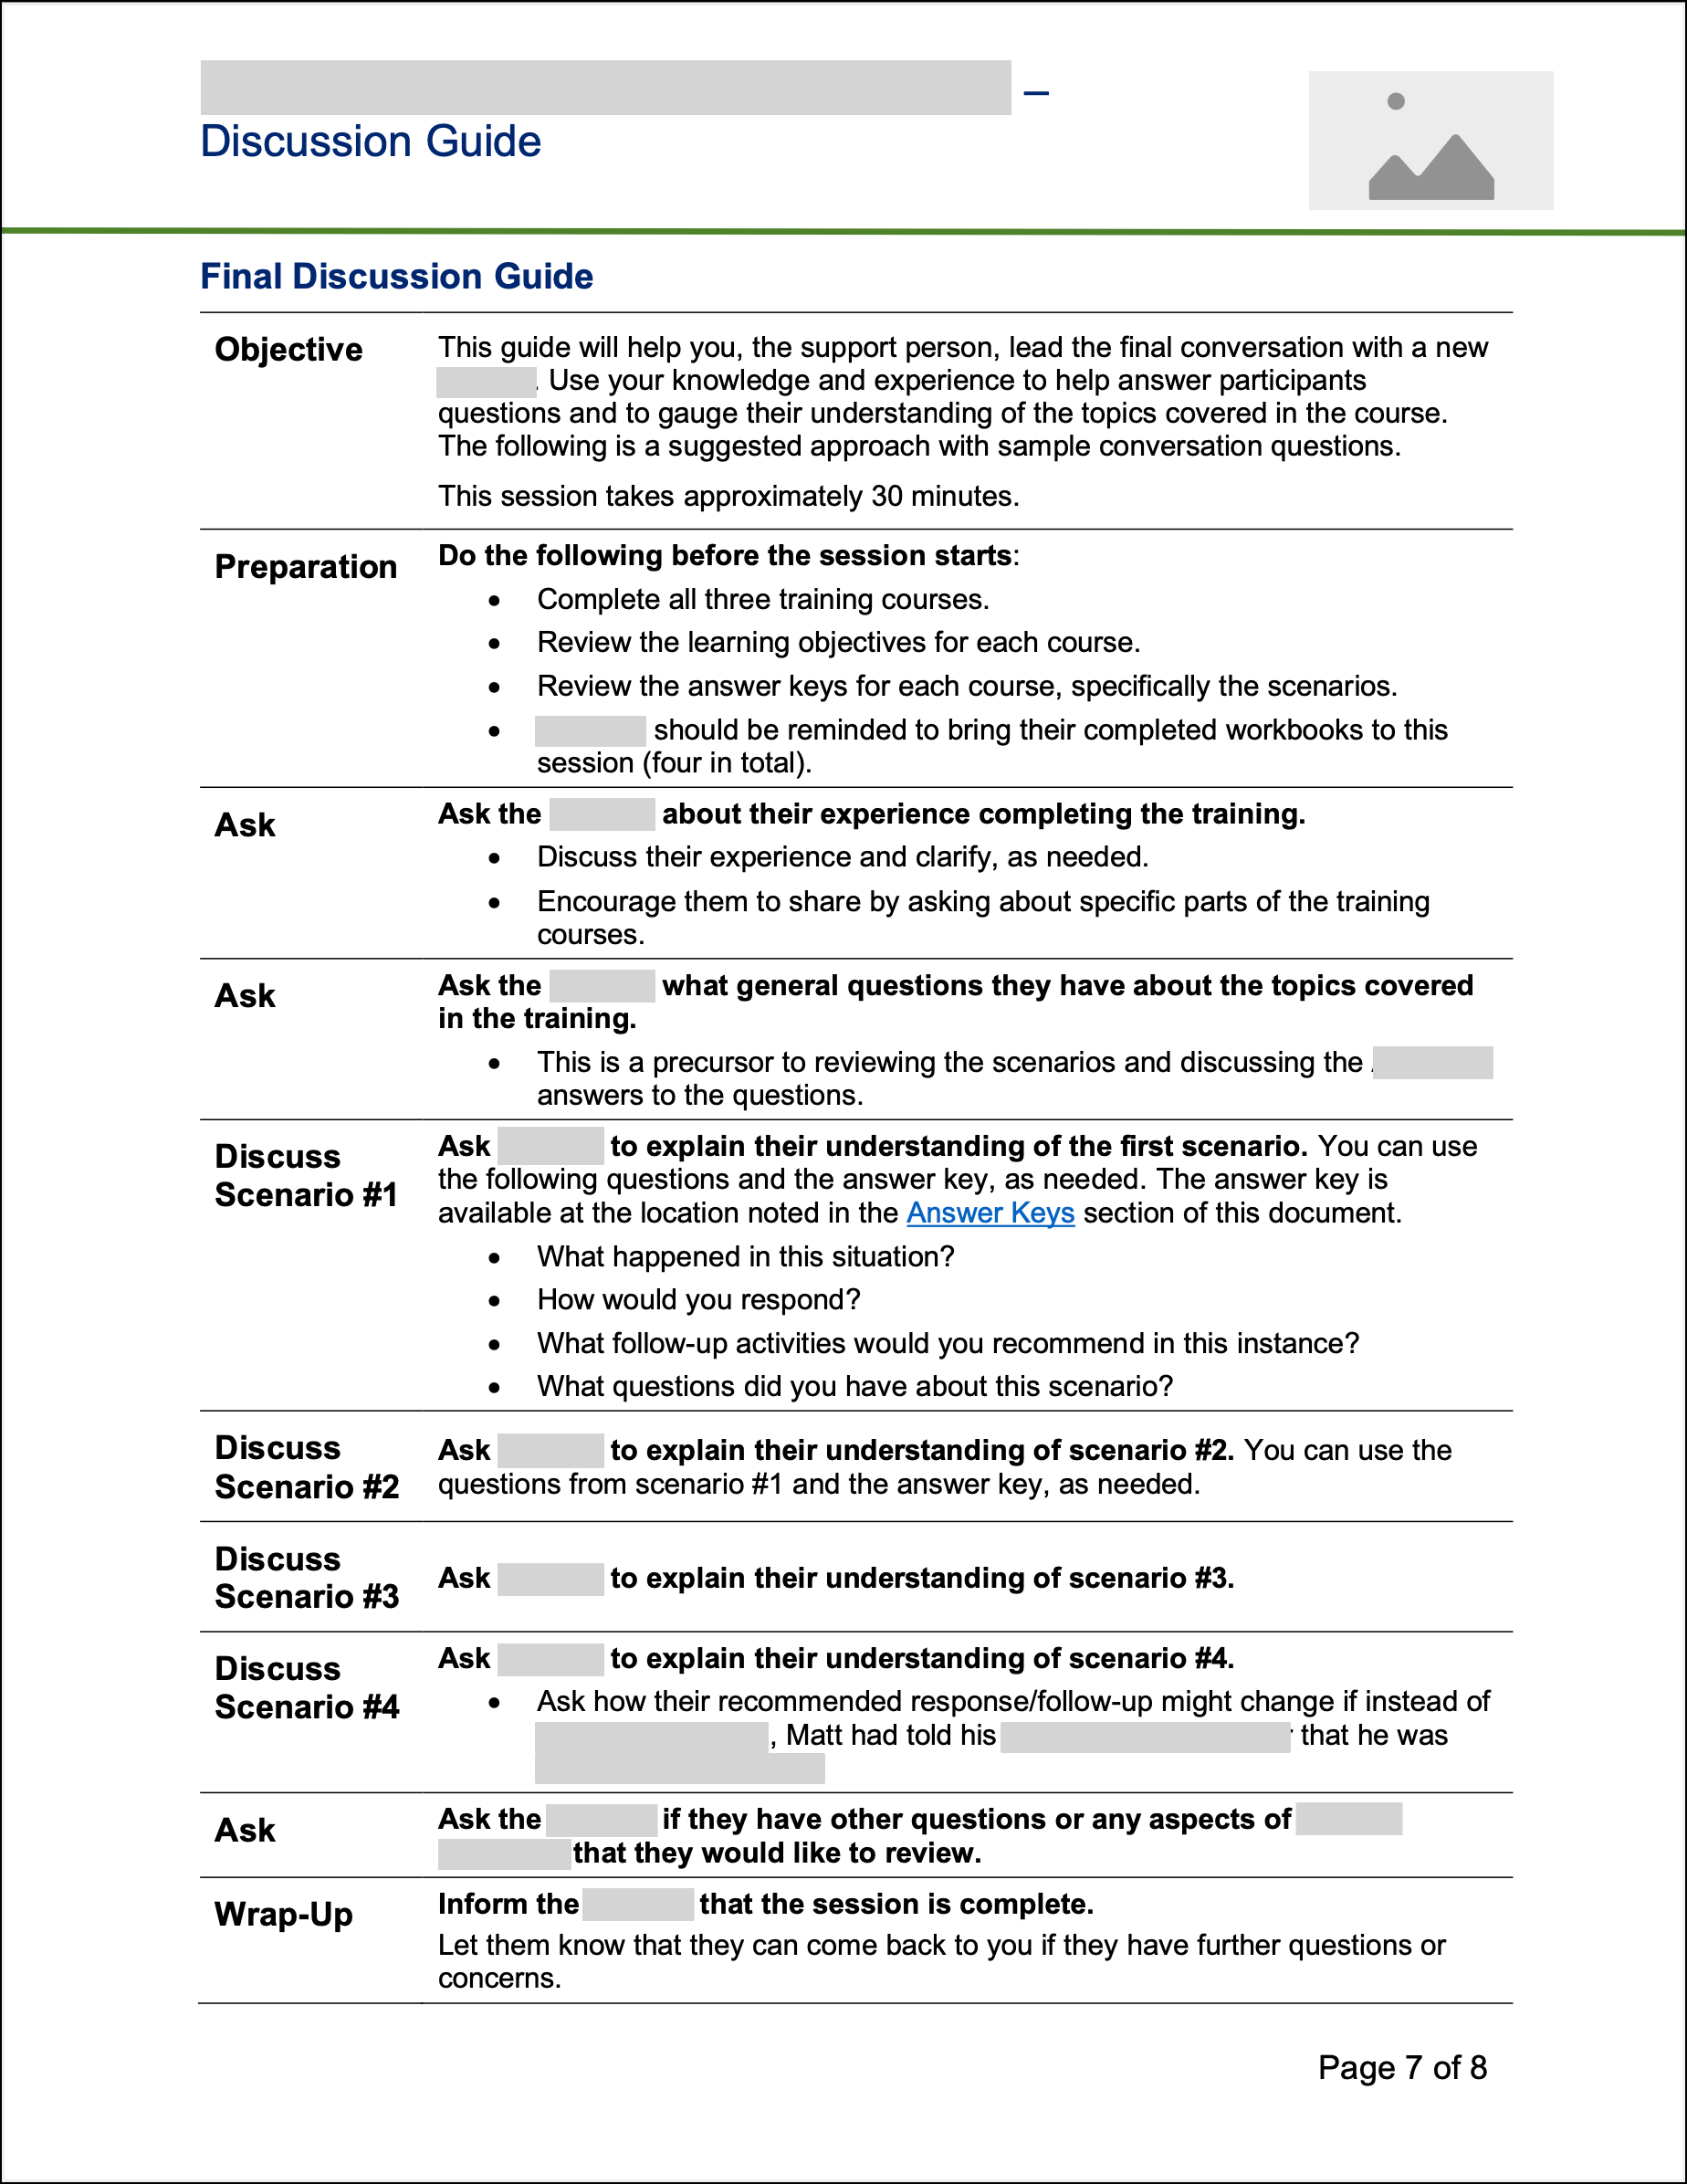 Discussion Guide example Hemeon Learning Inc.